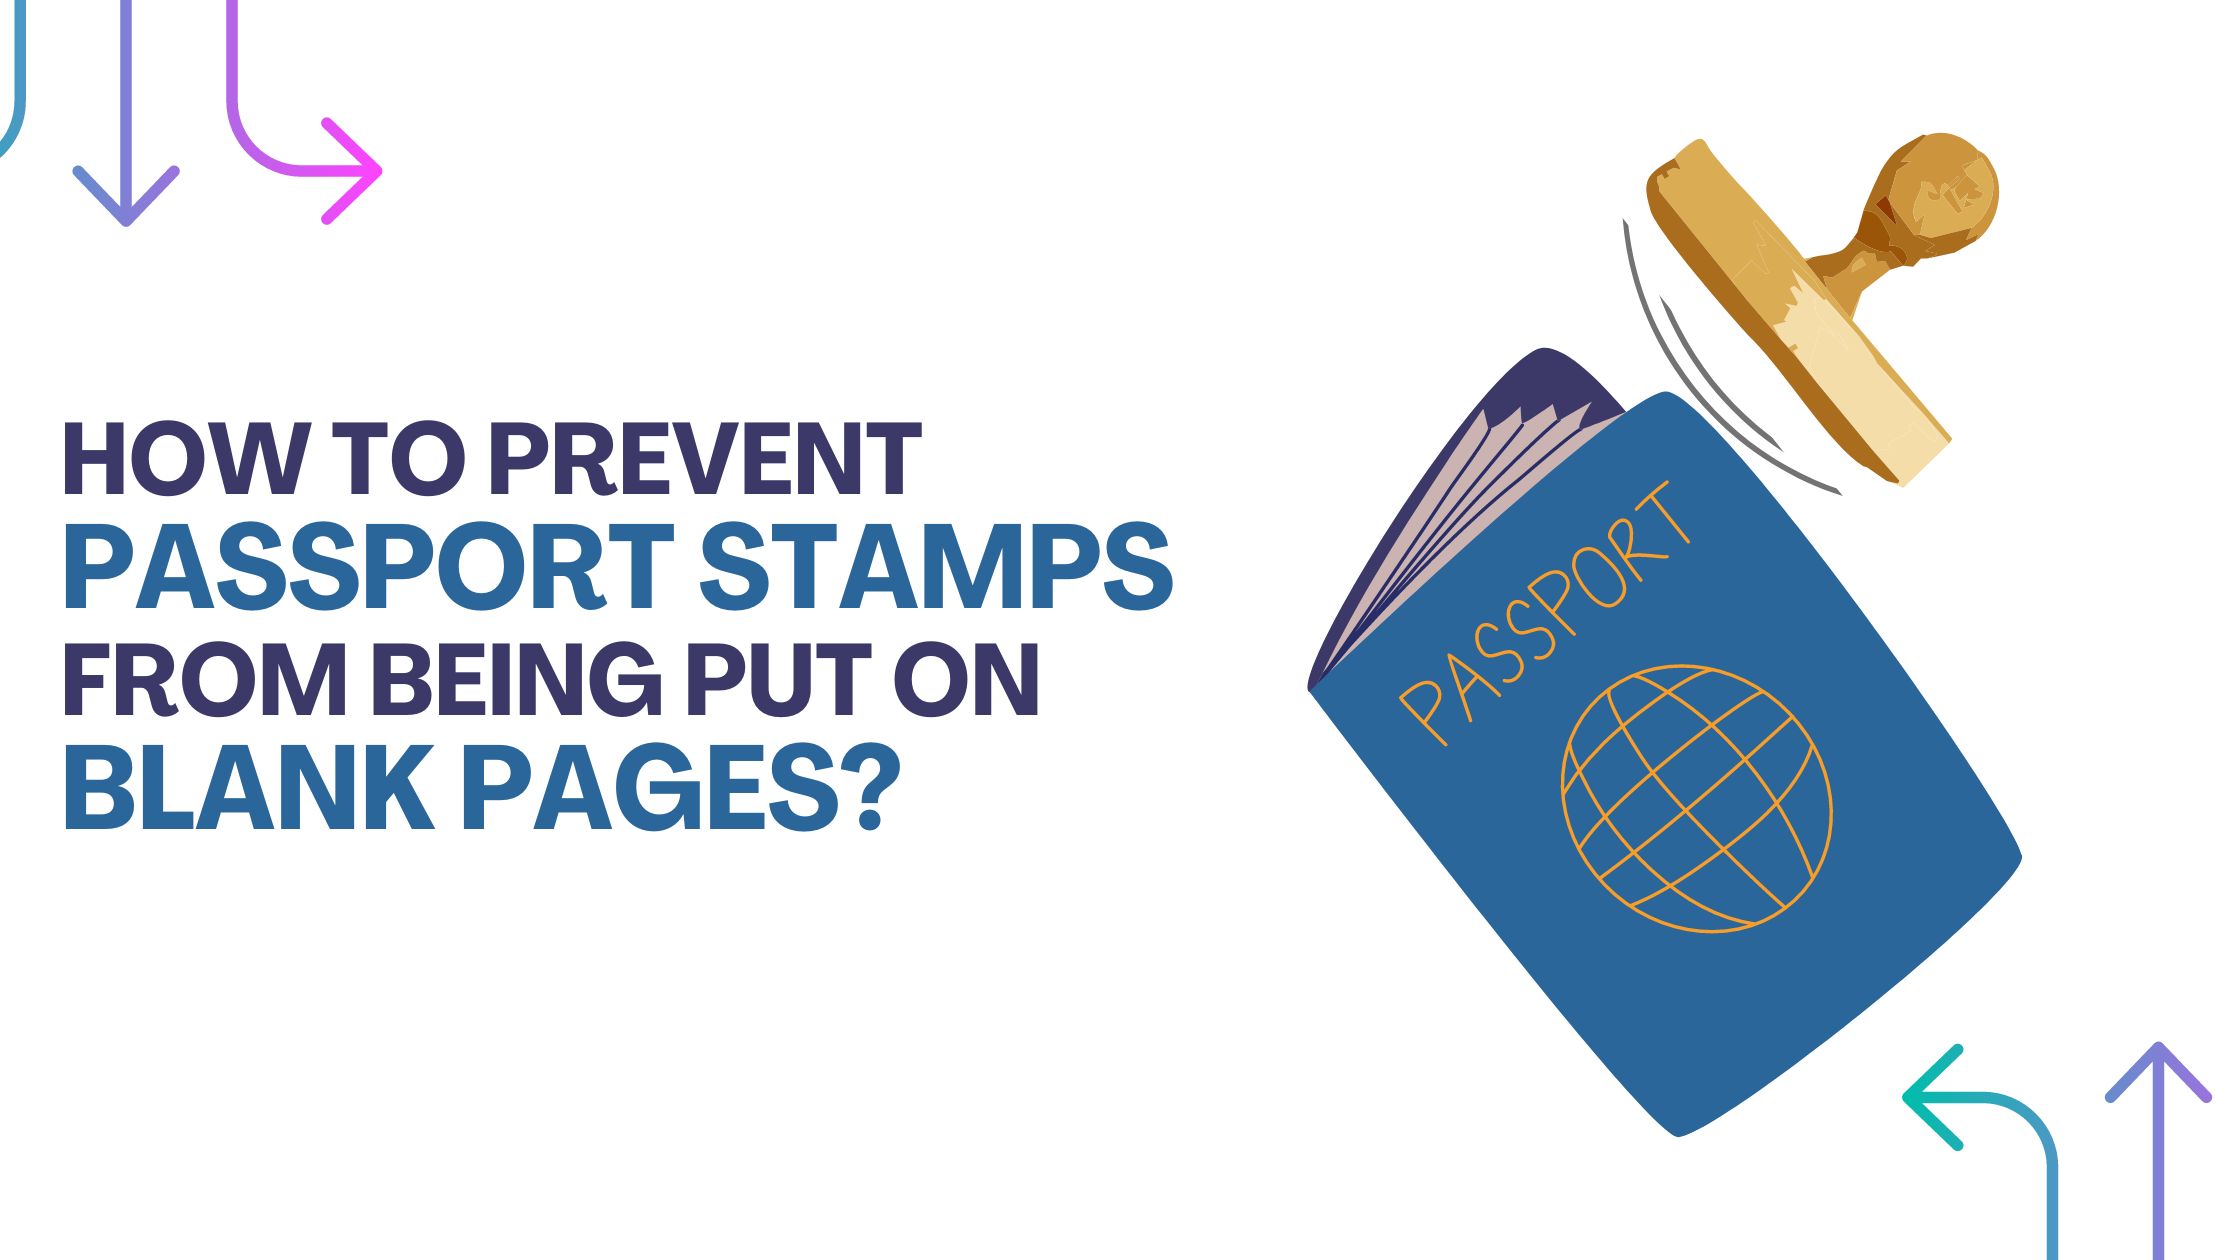 How To Prevent Passport Stamps From Being Put On Blank Pages